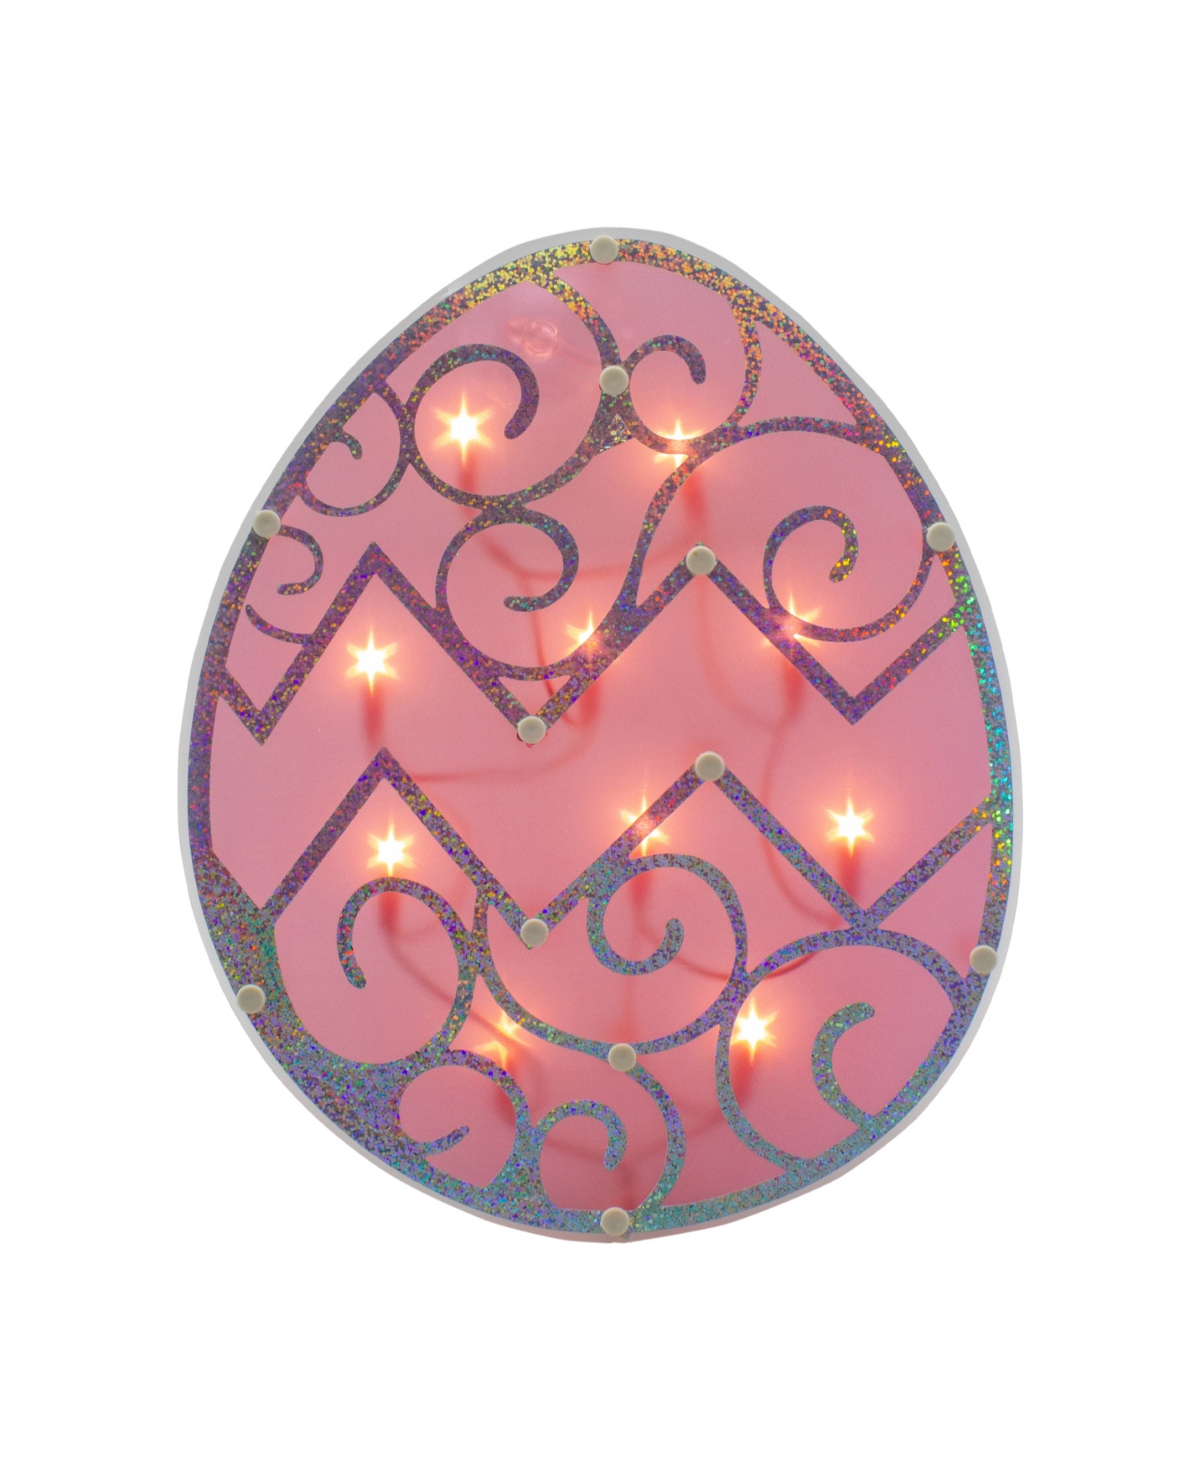 Northlight 12" Lighted Easter Egg Window Silhouette Decoration In Pink